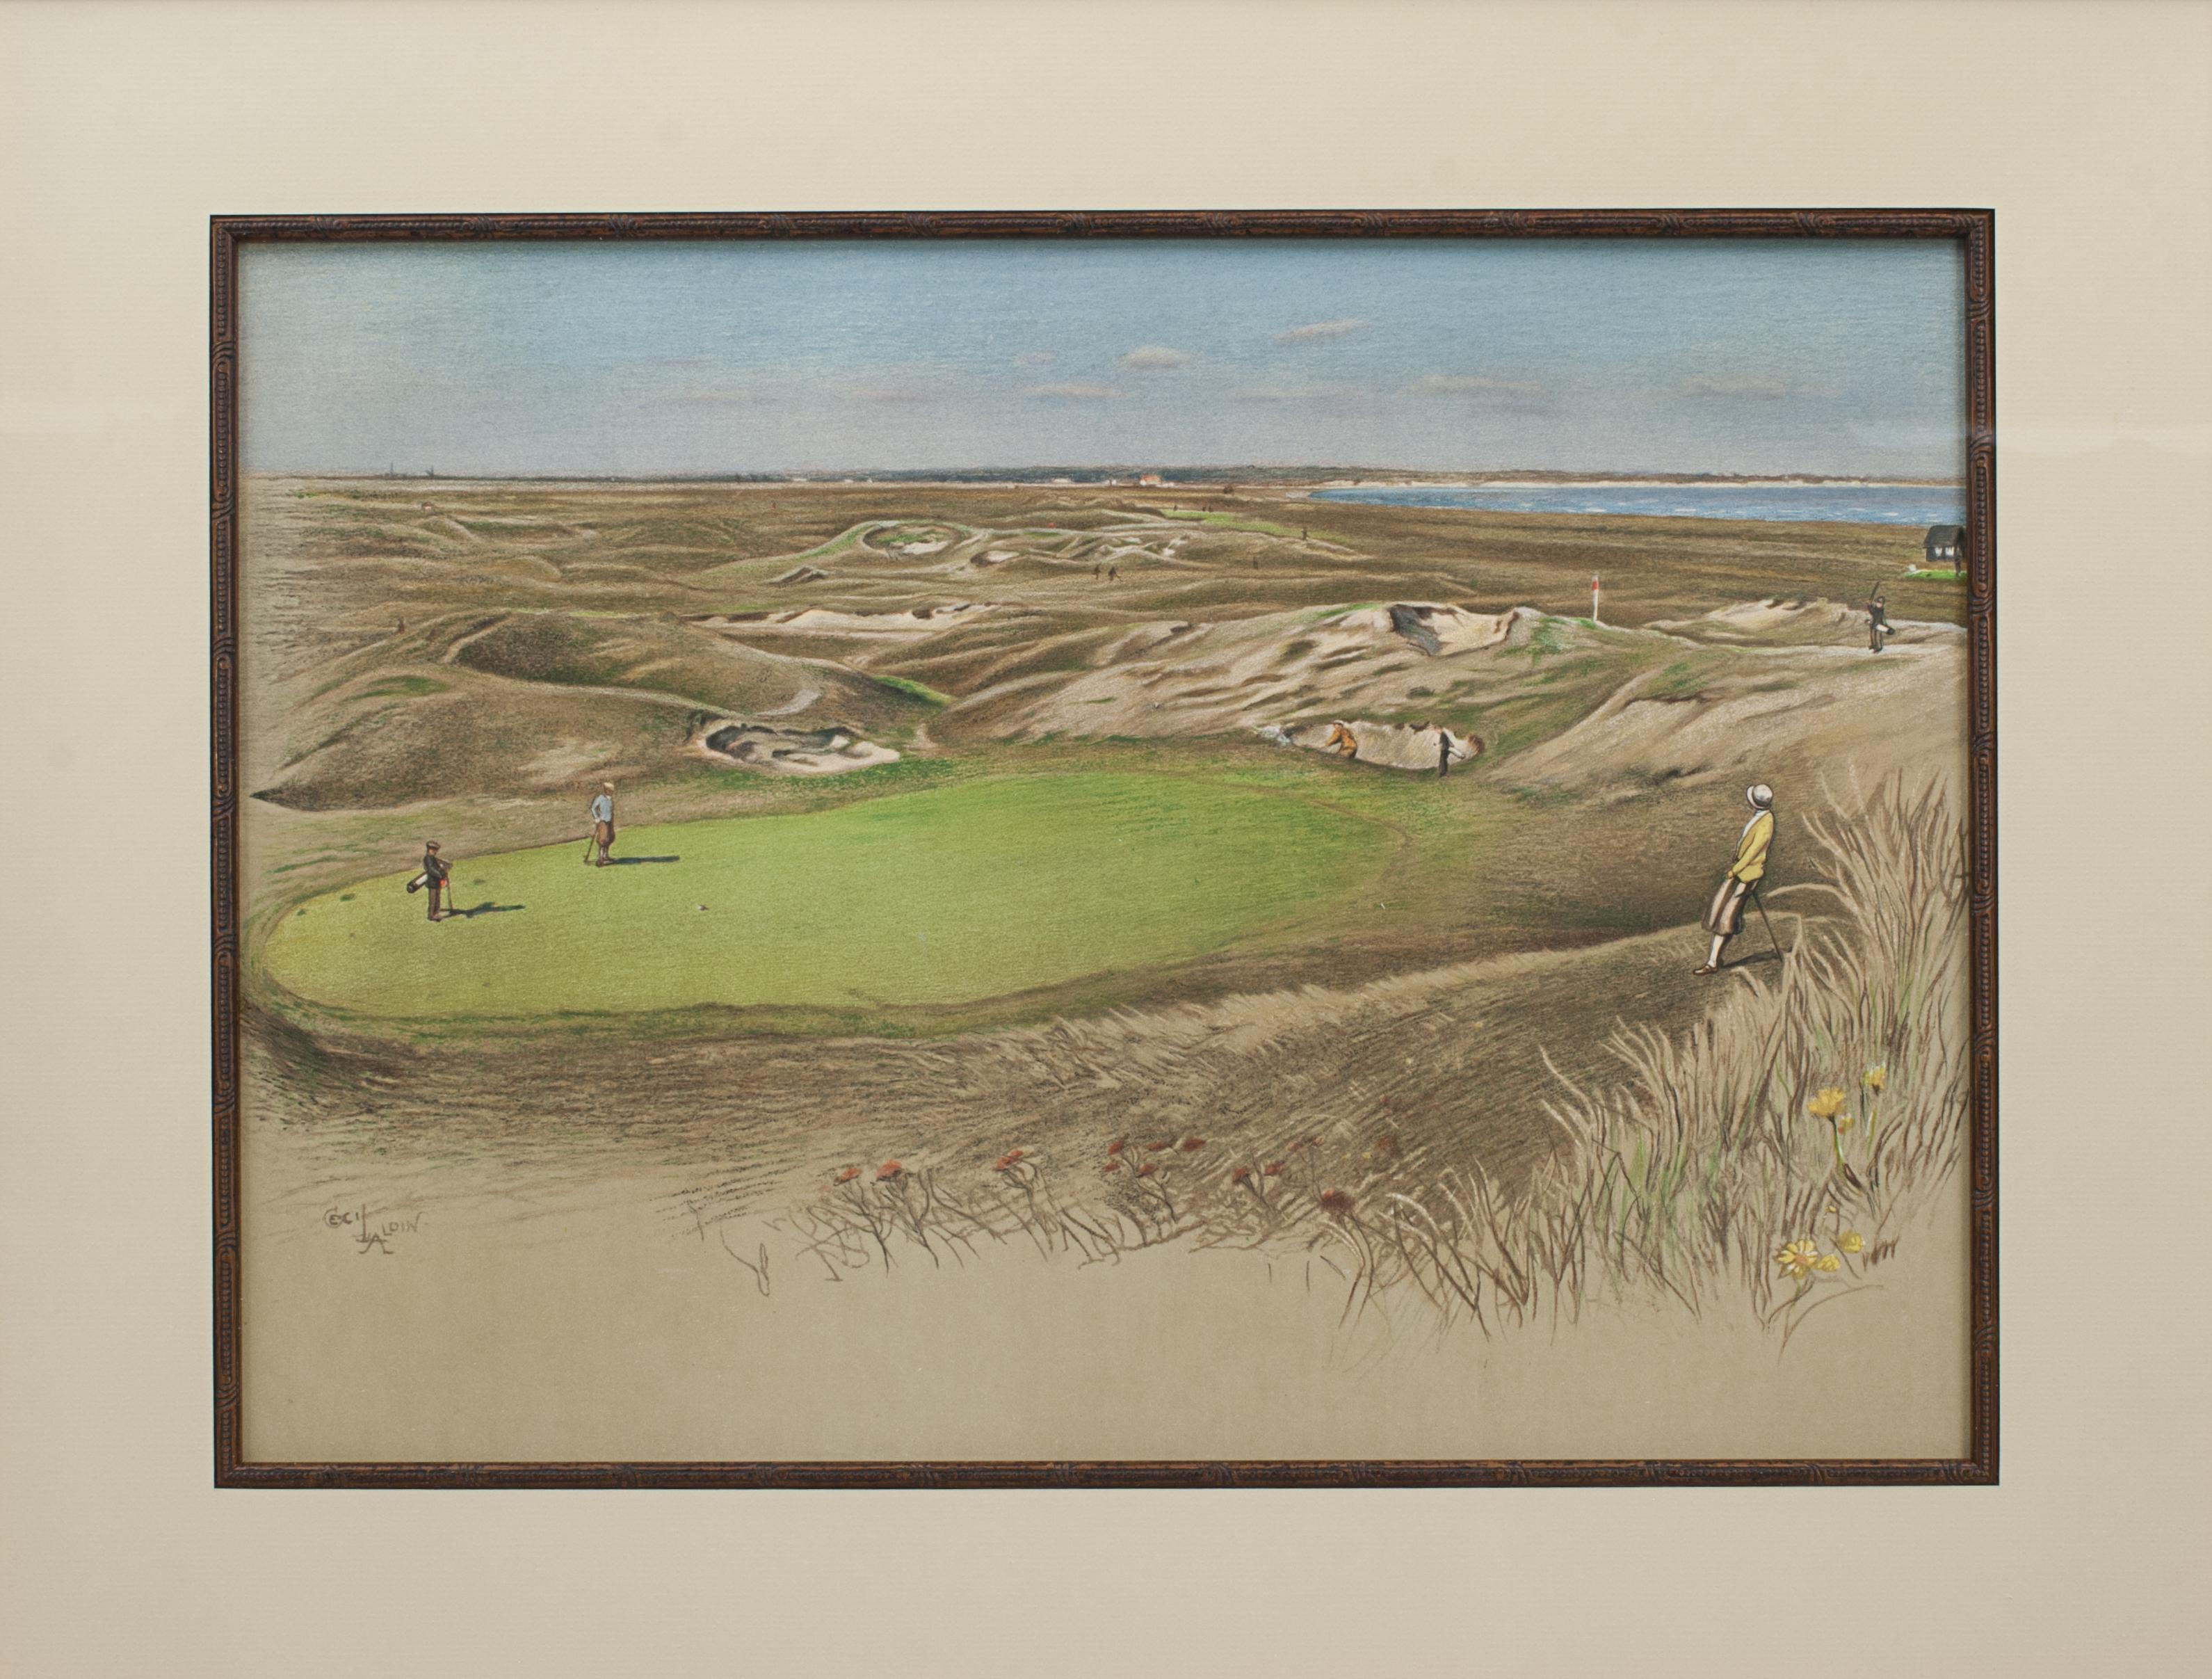 Sporting Art Golf Lithograph, Royal St. George's, 